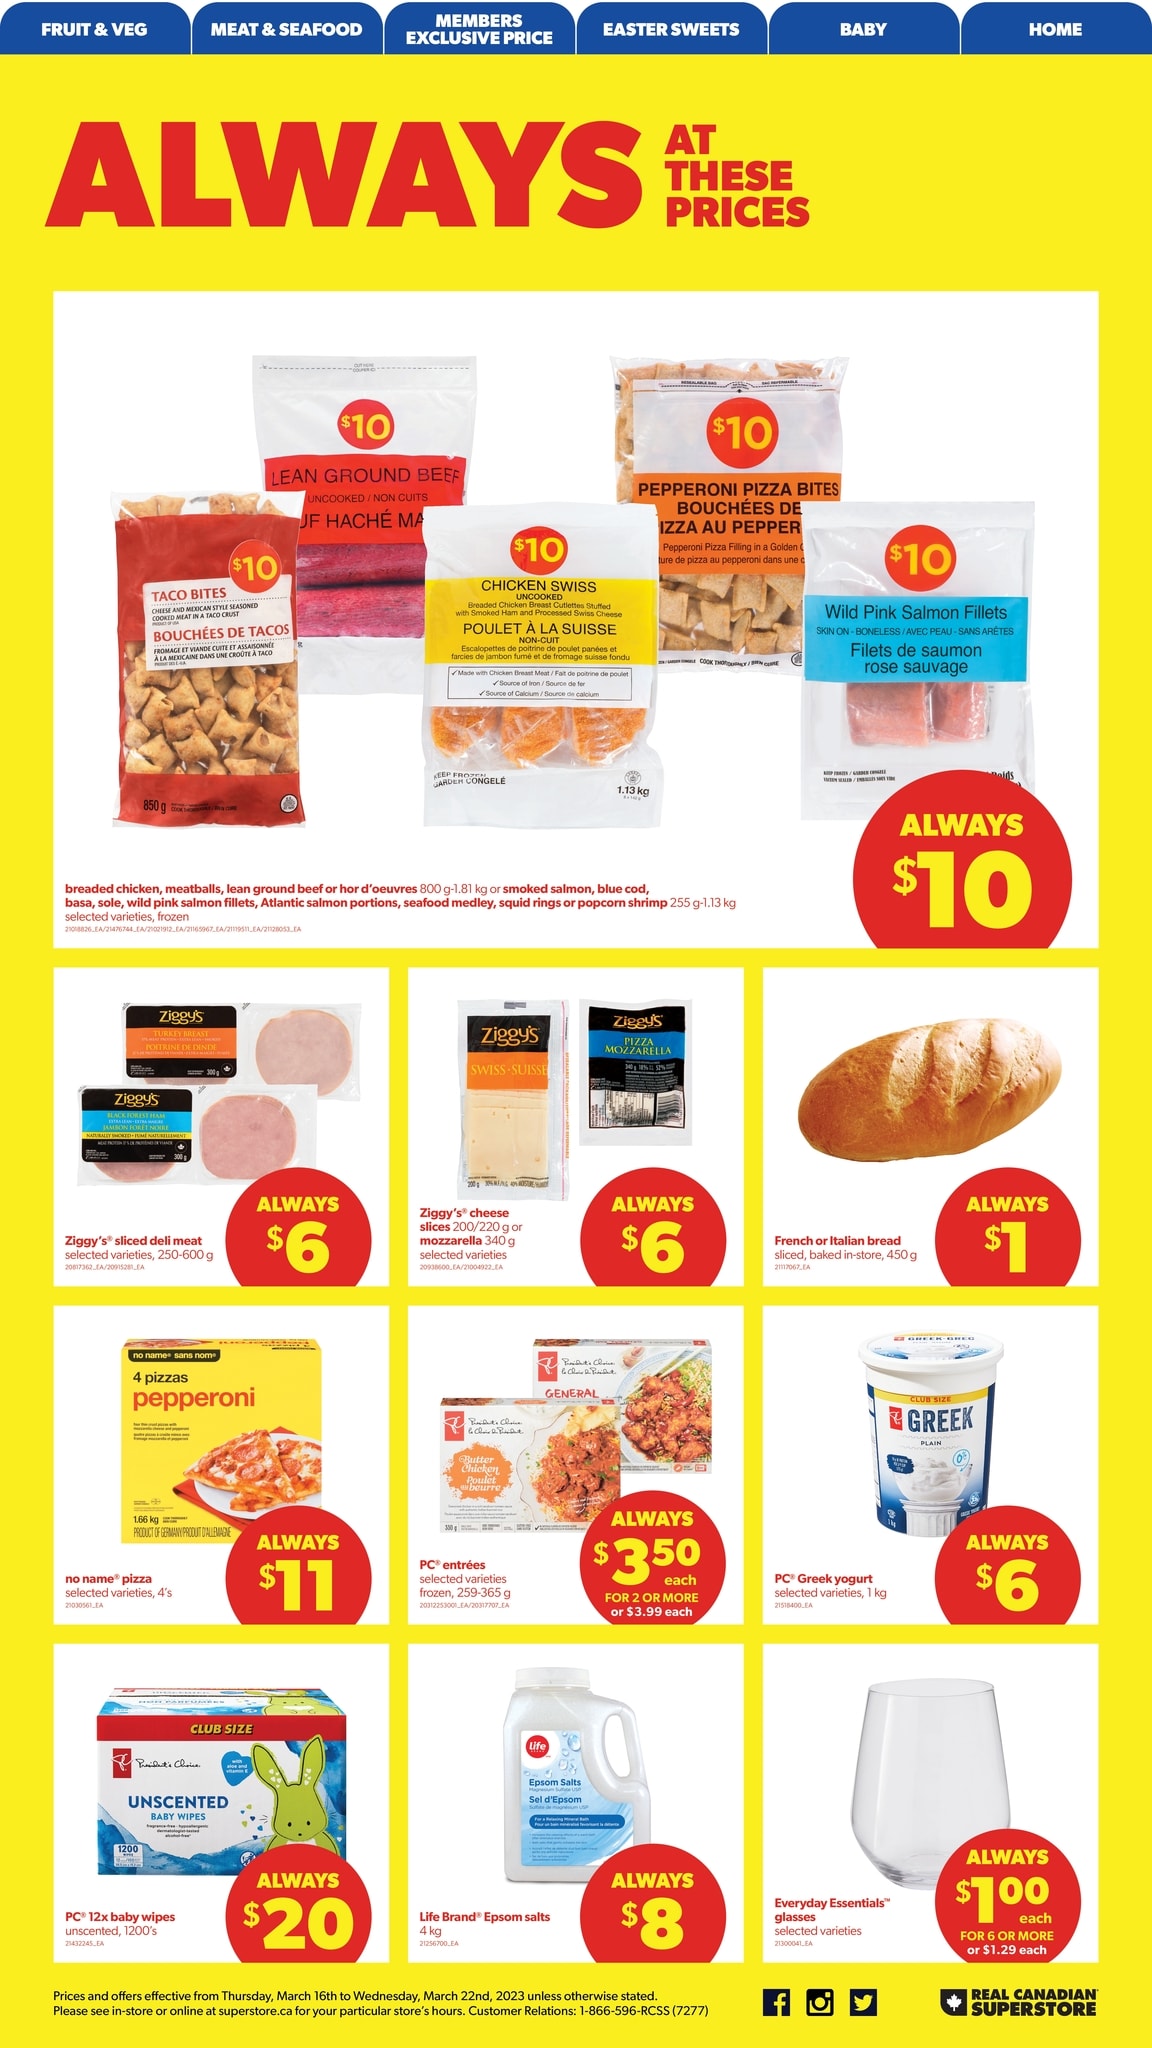 Real Canadian Superstore - Ontario - Weekly Flyer Specials - Page 7